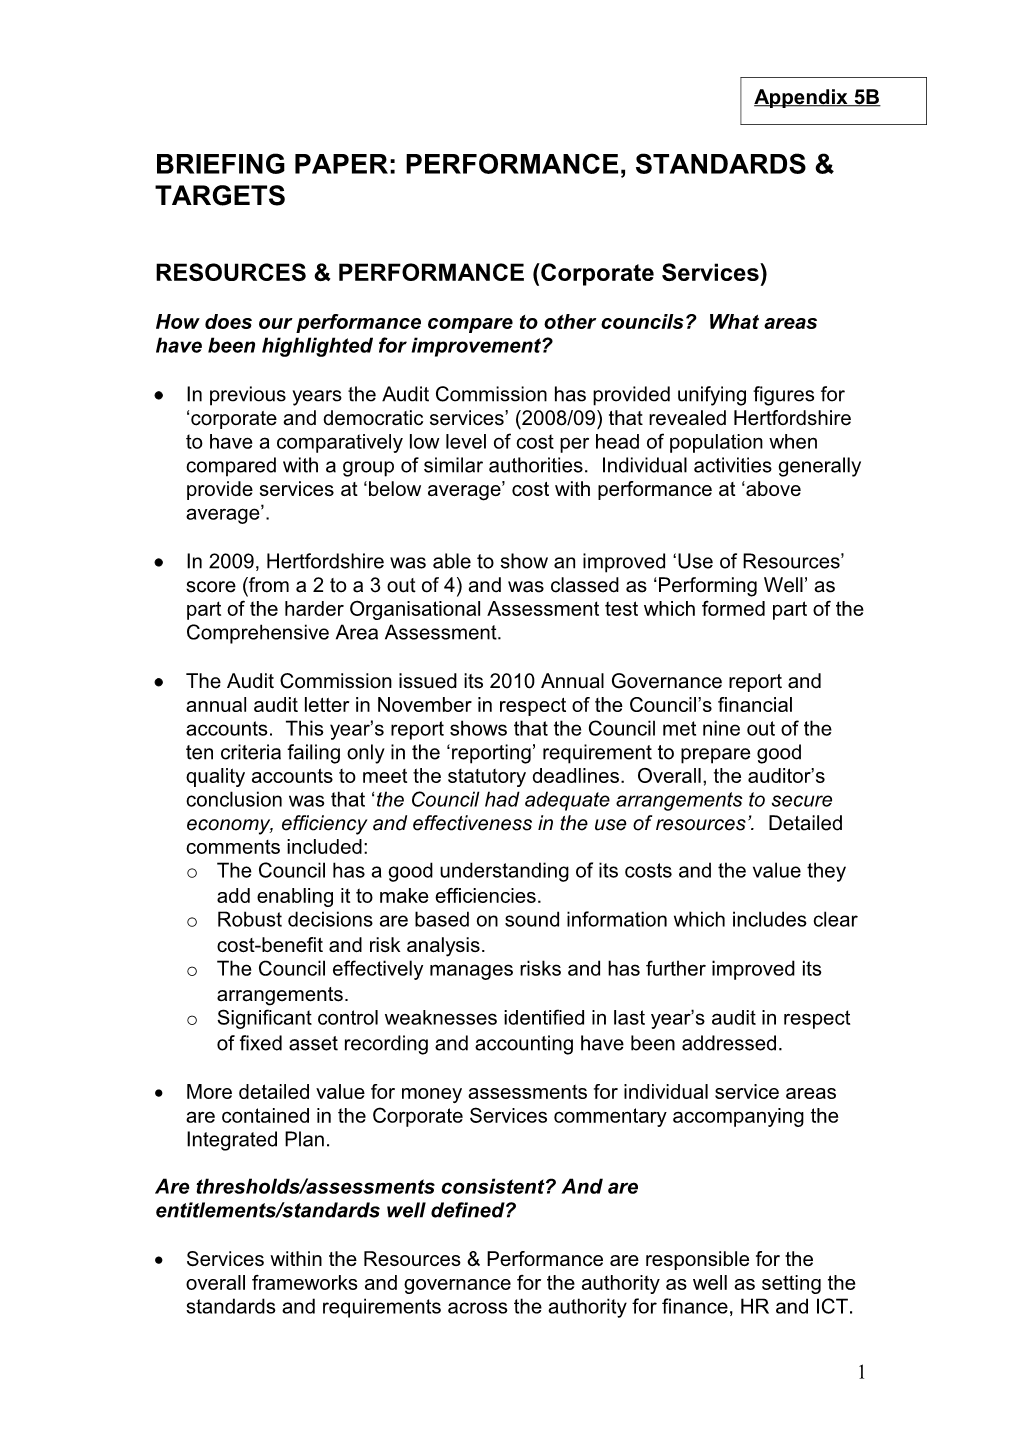 Briefing Paper: Performance, Standards & Targets